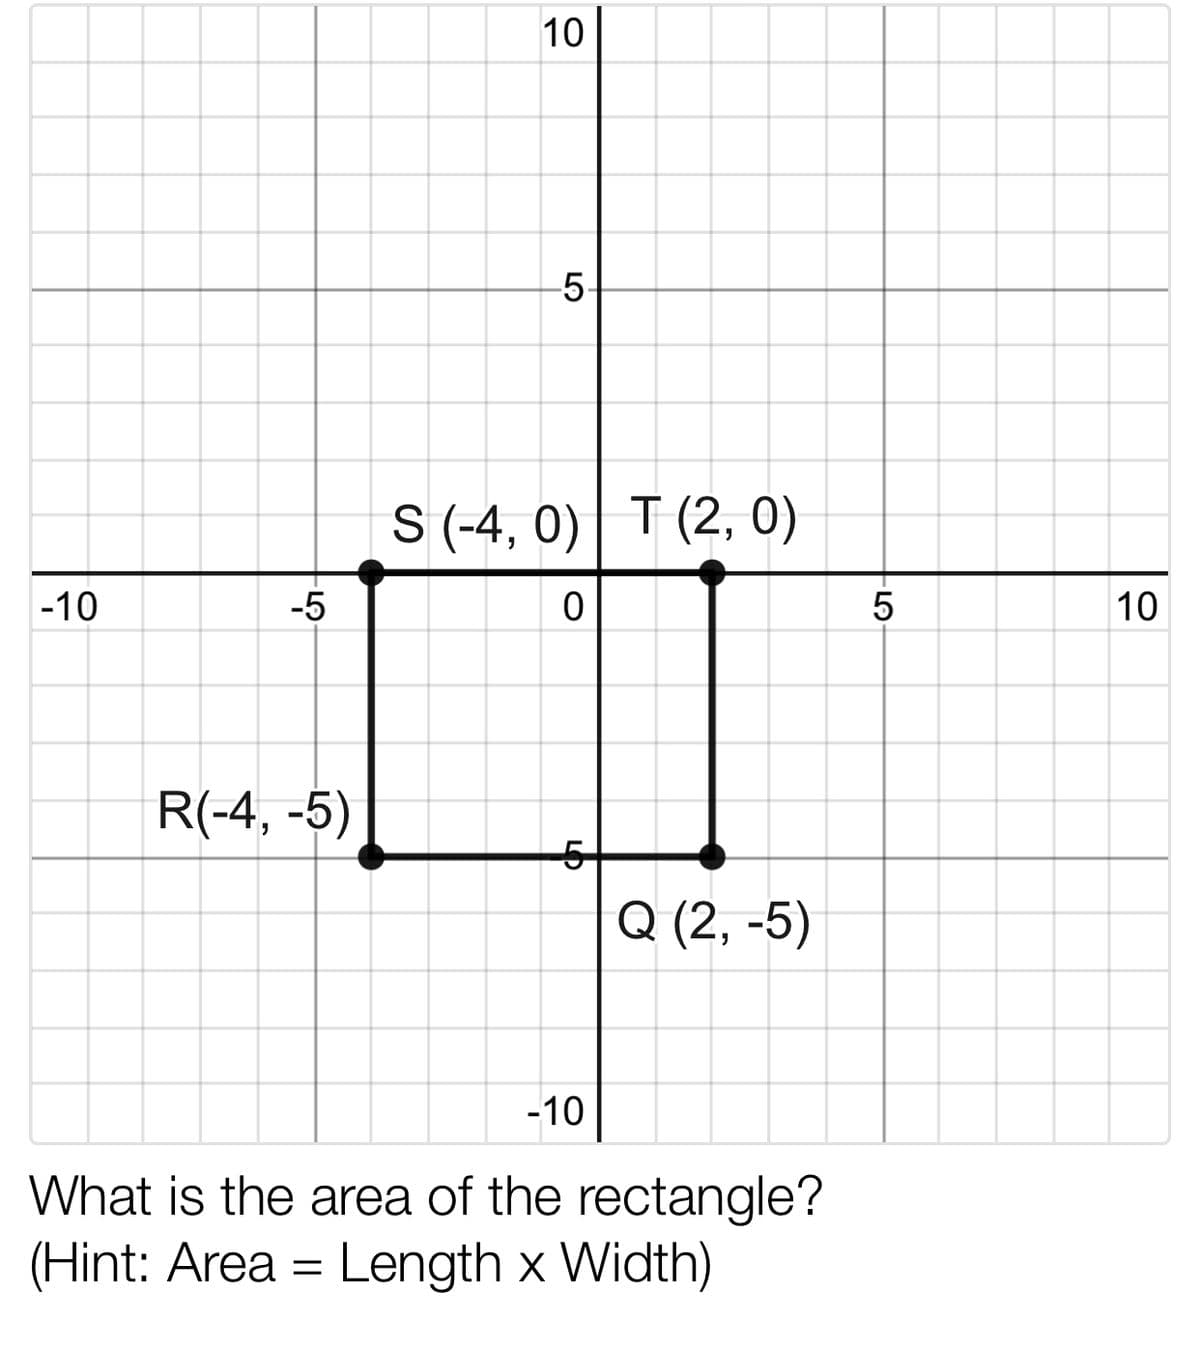 -5-
S (-4, 0)| T (2, 0)
-10
-5
10
R(-4, -5)
Q (2, -5)
-10
What is the area of the rectangle?
(Hint: Area = Length x Width)
10
LO
